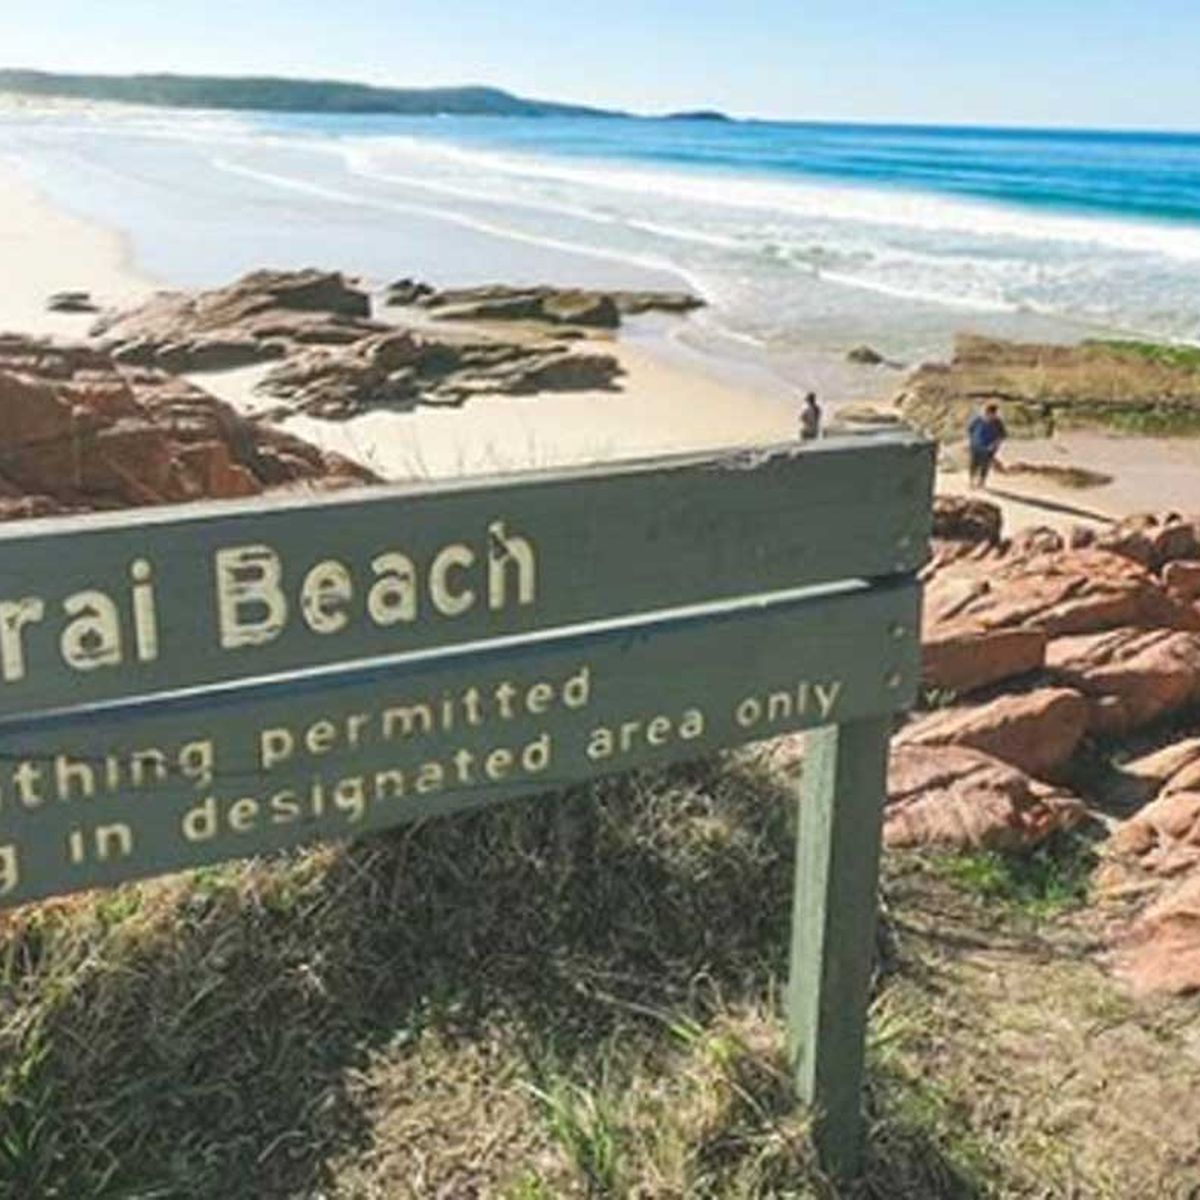 Nudist Campers - Shark attack: Man mauled while swimming off NSW nudist beach